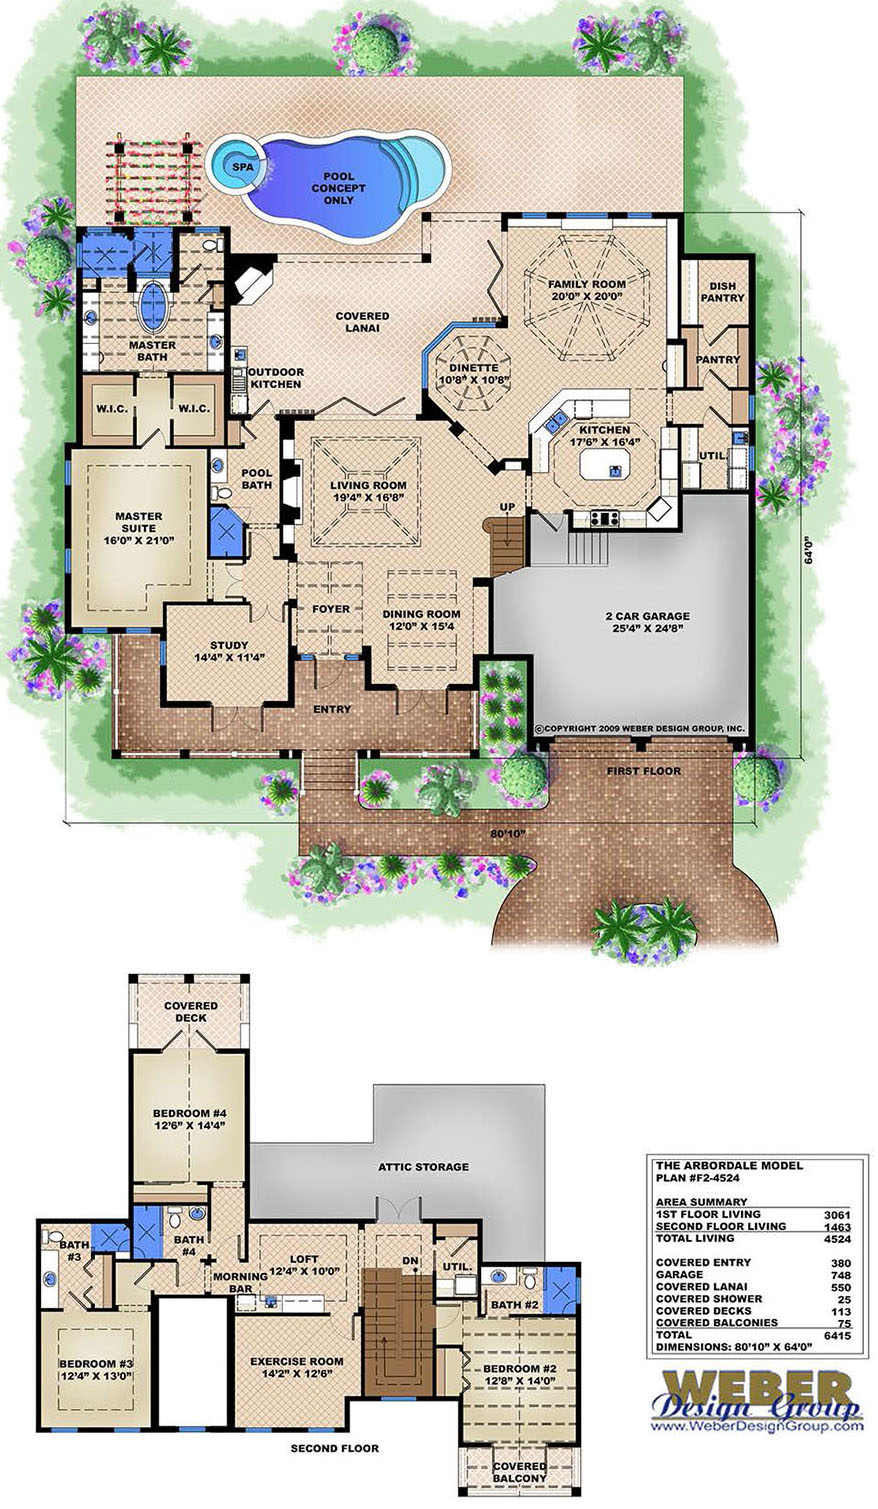 House Plans With Pools Luxury Home Floor Plans With Swimming Pools,Brown Neutral Living Room Wall Colors